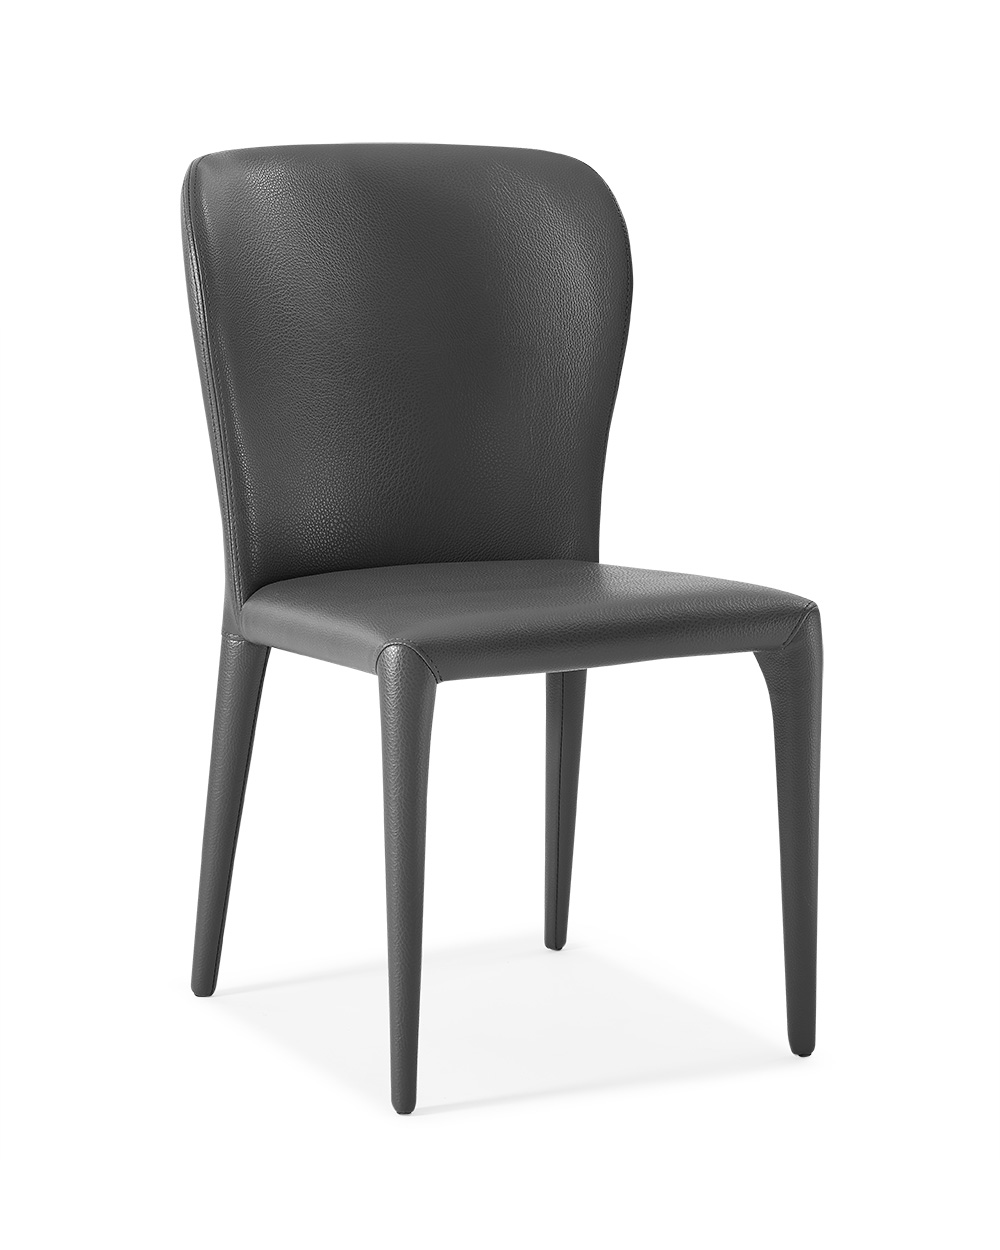 20" X 24" X 35" Gray Faux Leather or Metal Dining Chair